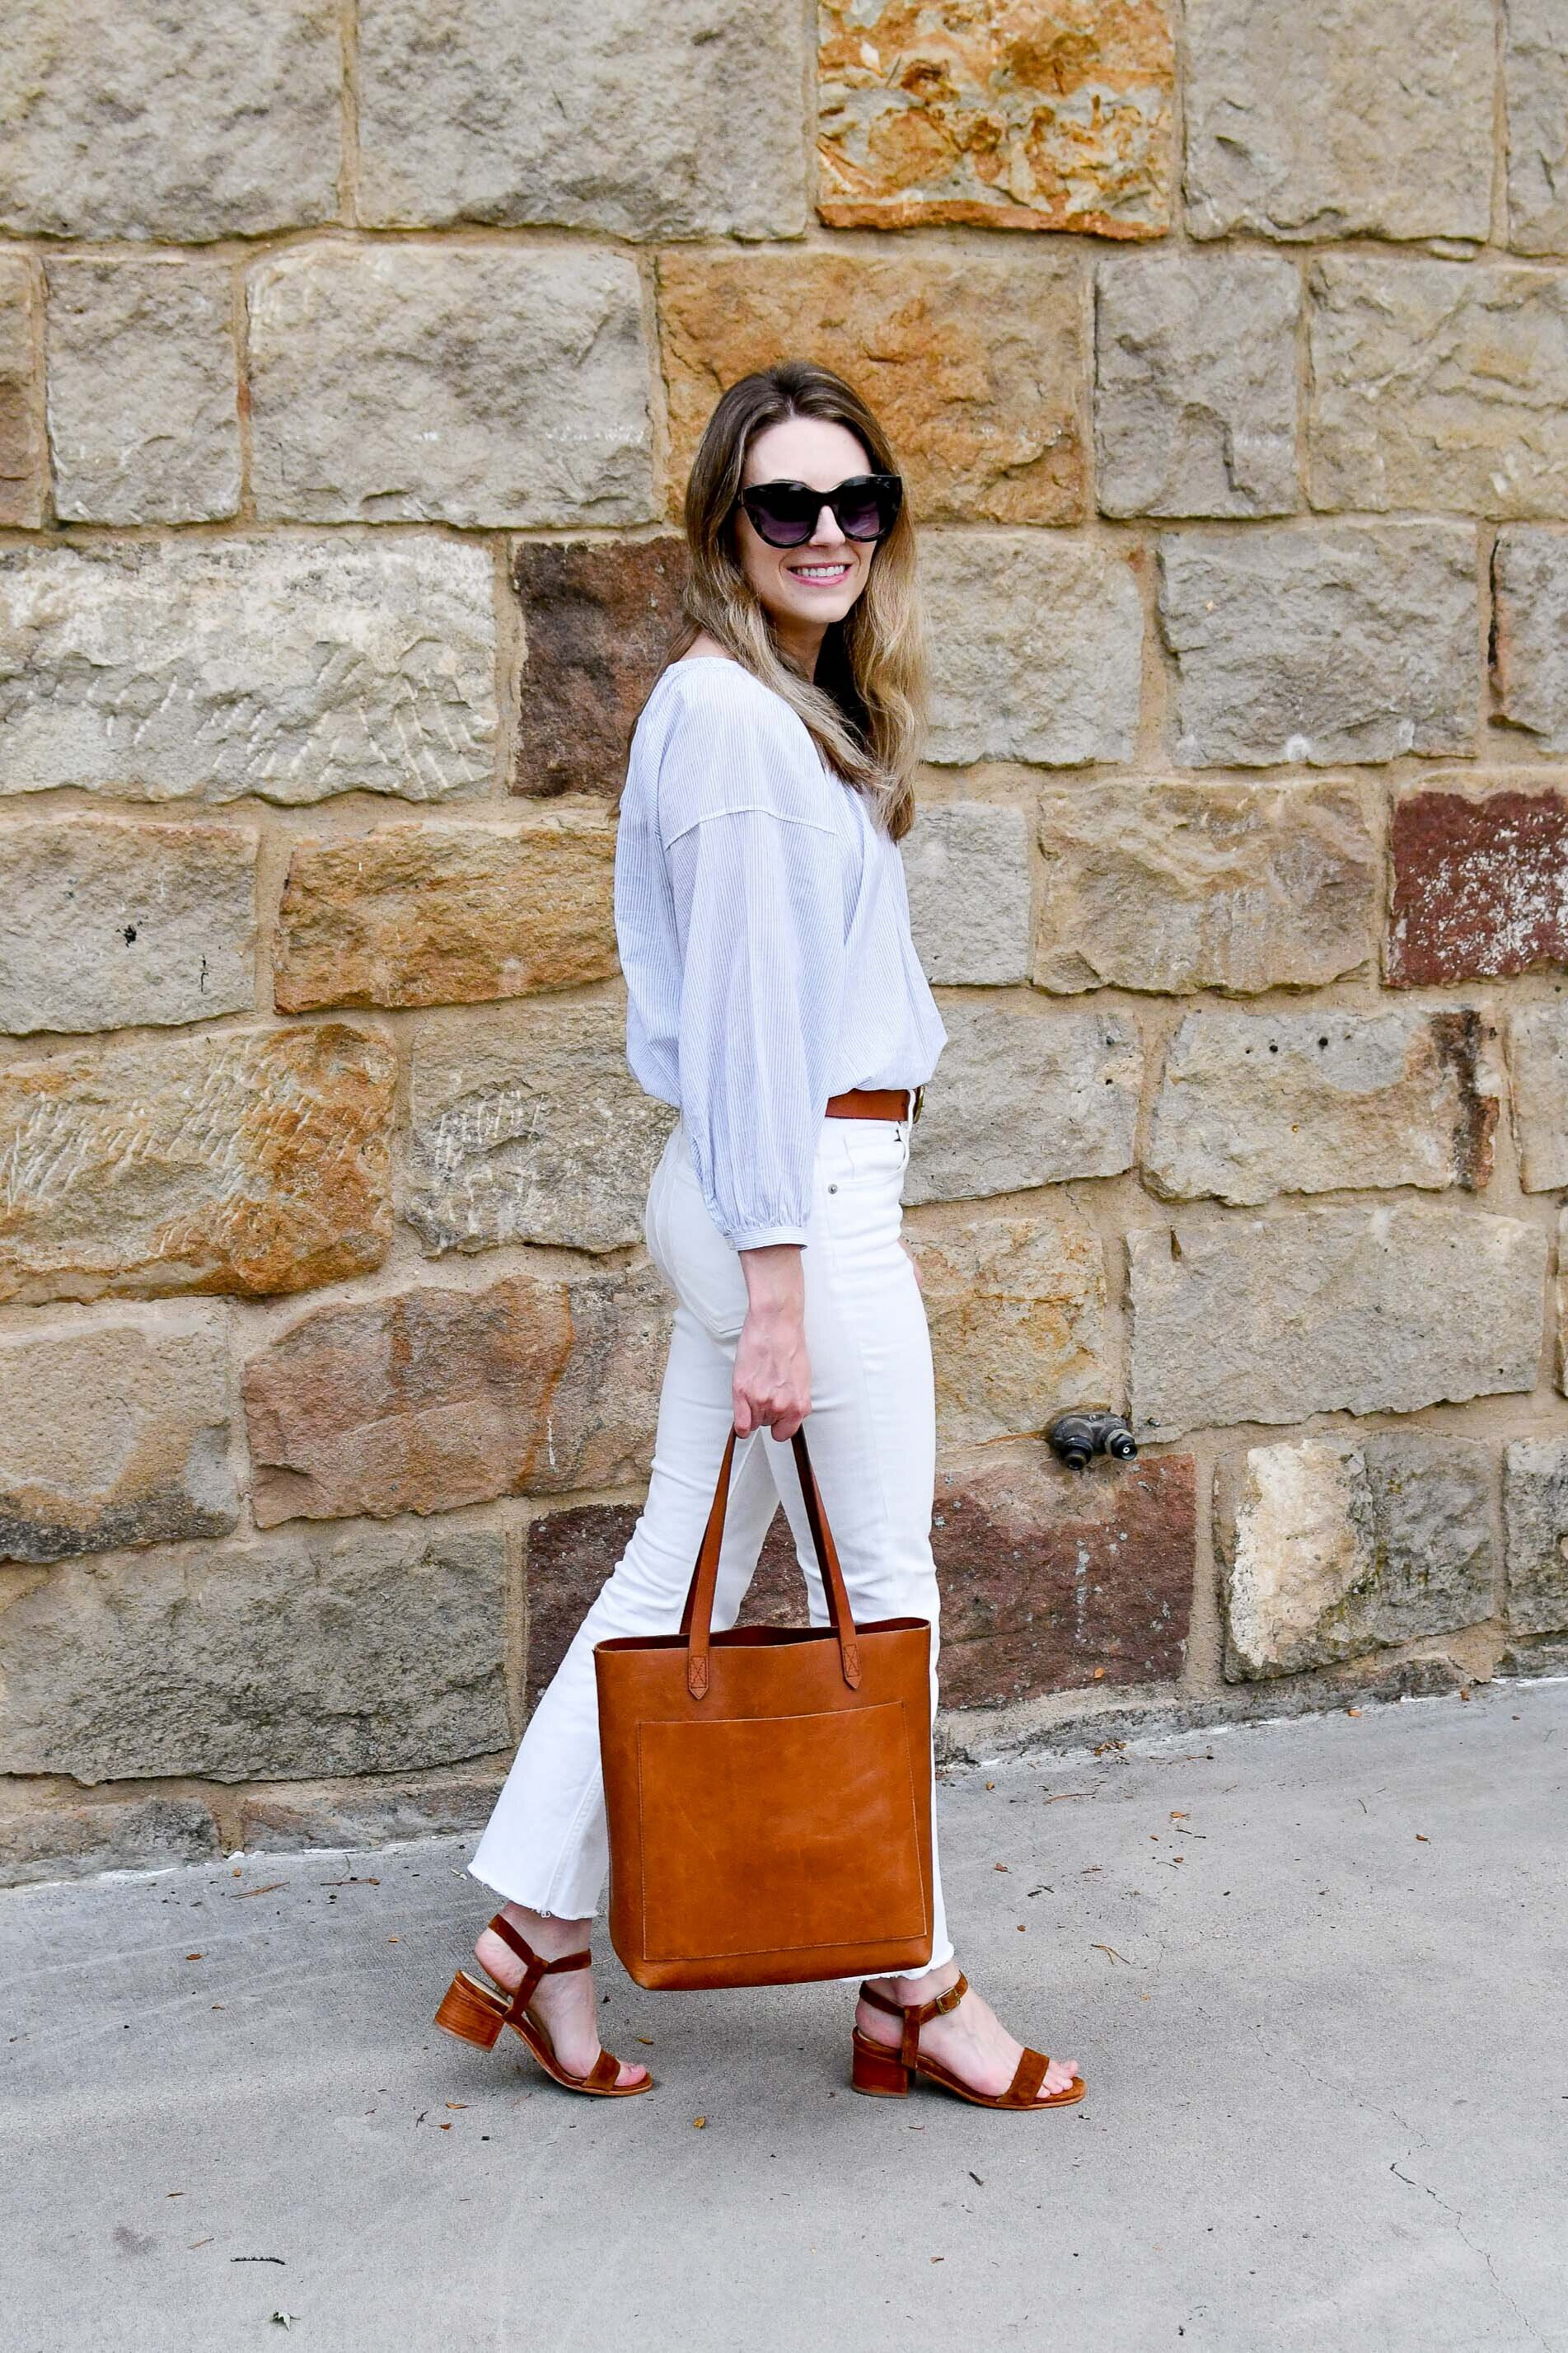 8 celebrity-approved bags under $200: Madewell, Longchamp, and